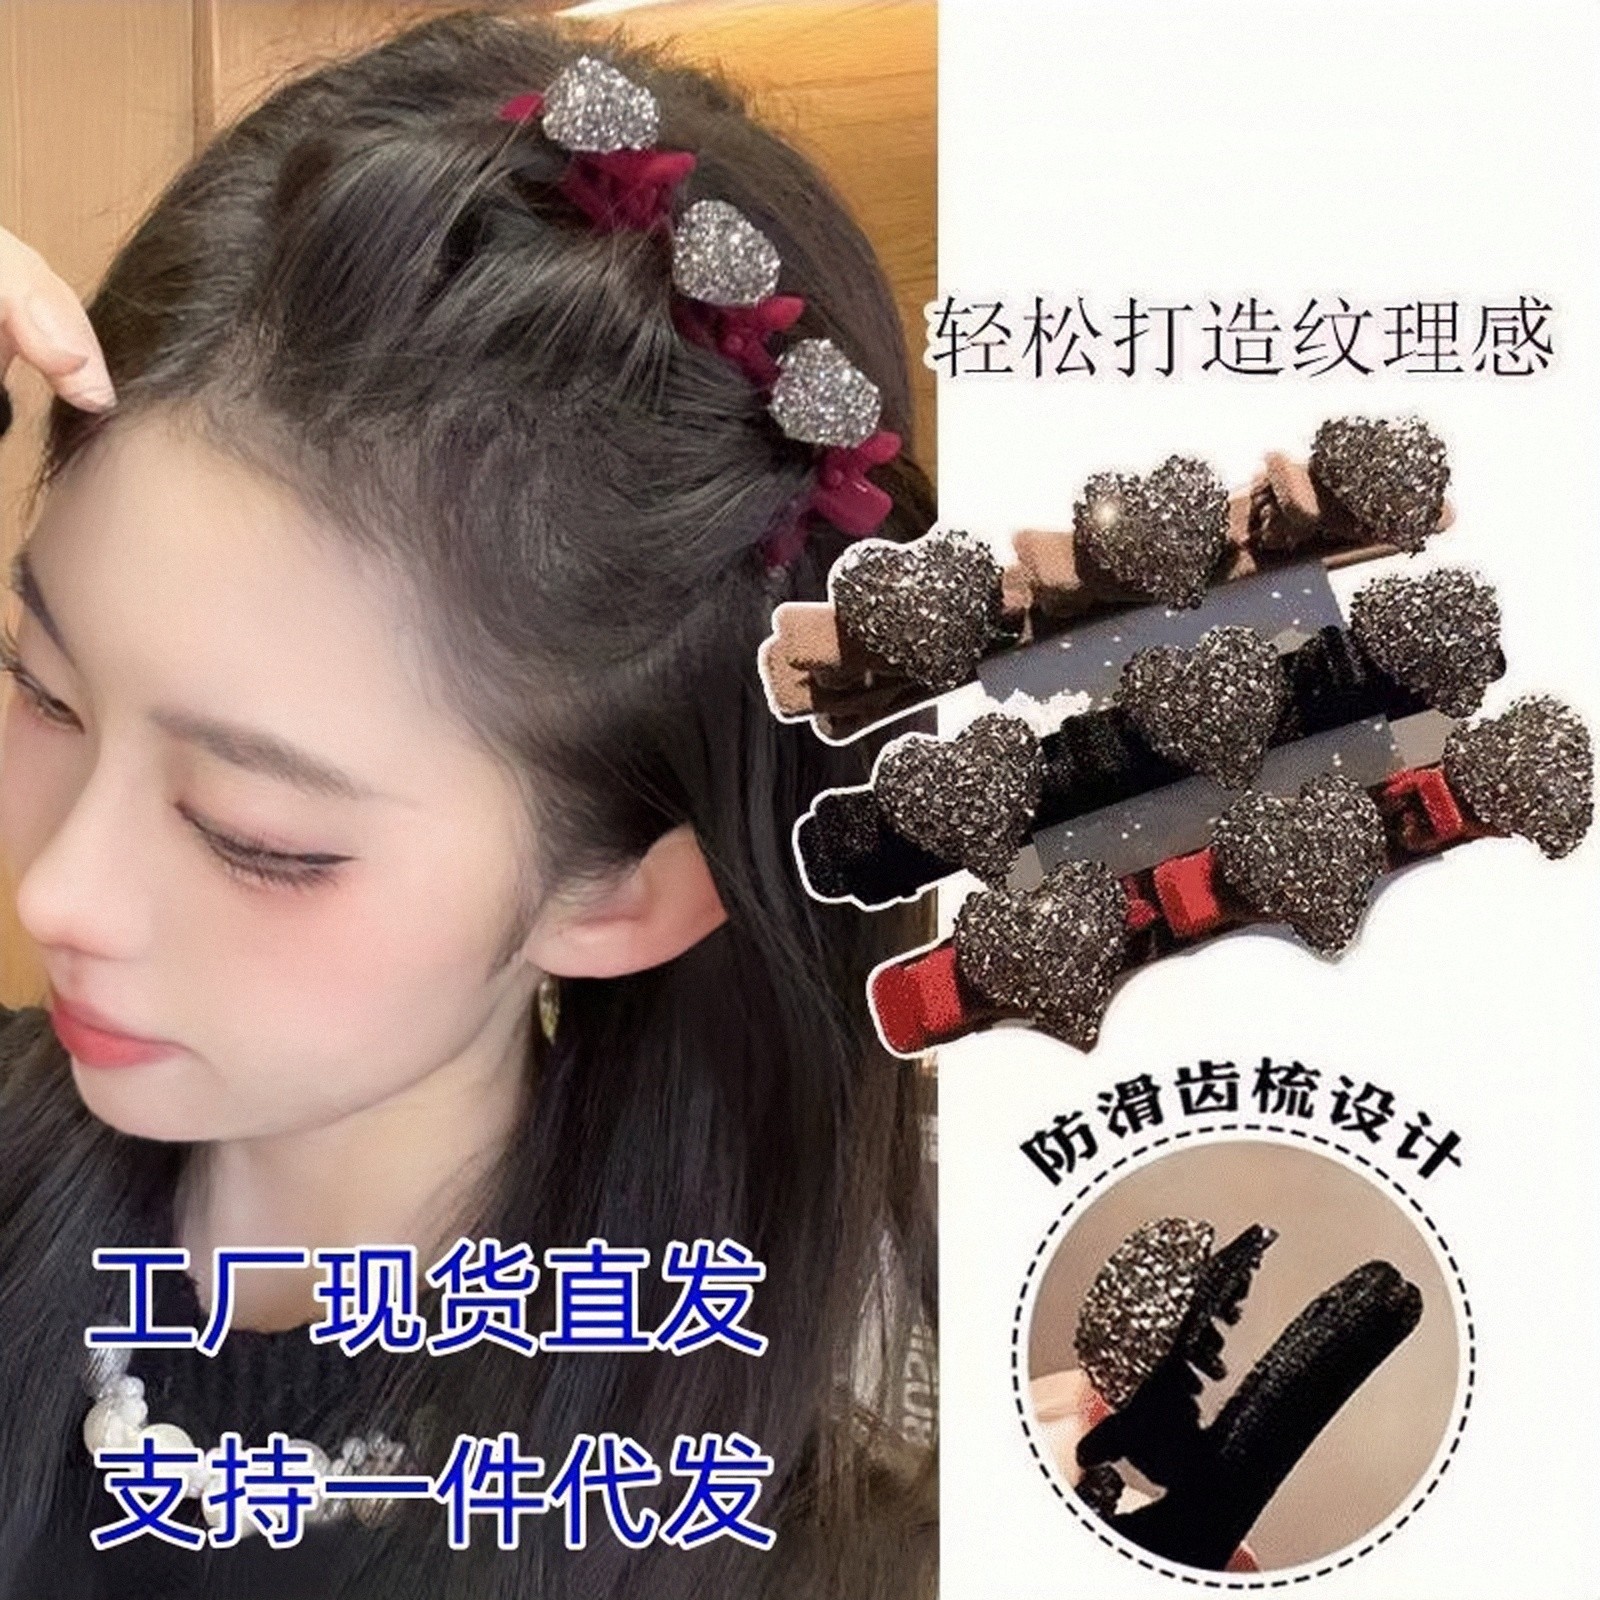 High-grade hairpin women's autumn and winter side braided hair bangs side clip small size grip forehead hair flocking love side clip